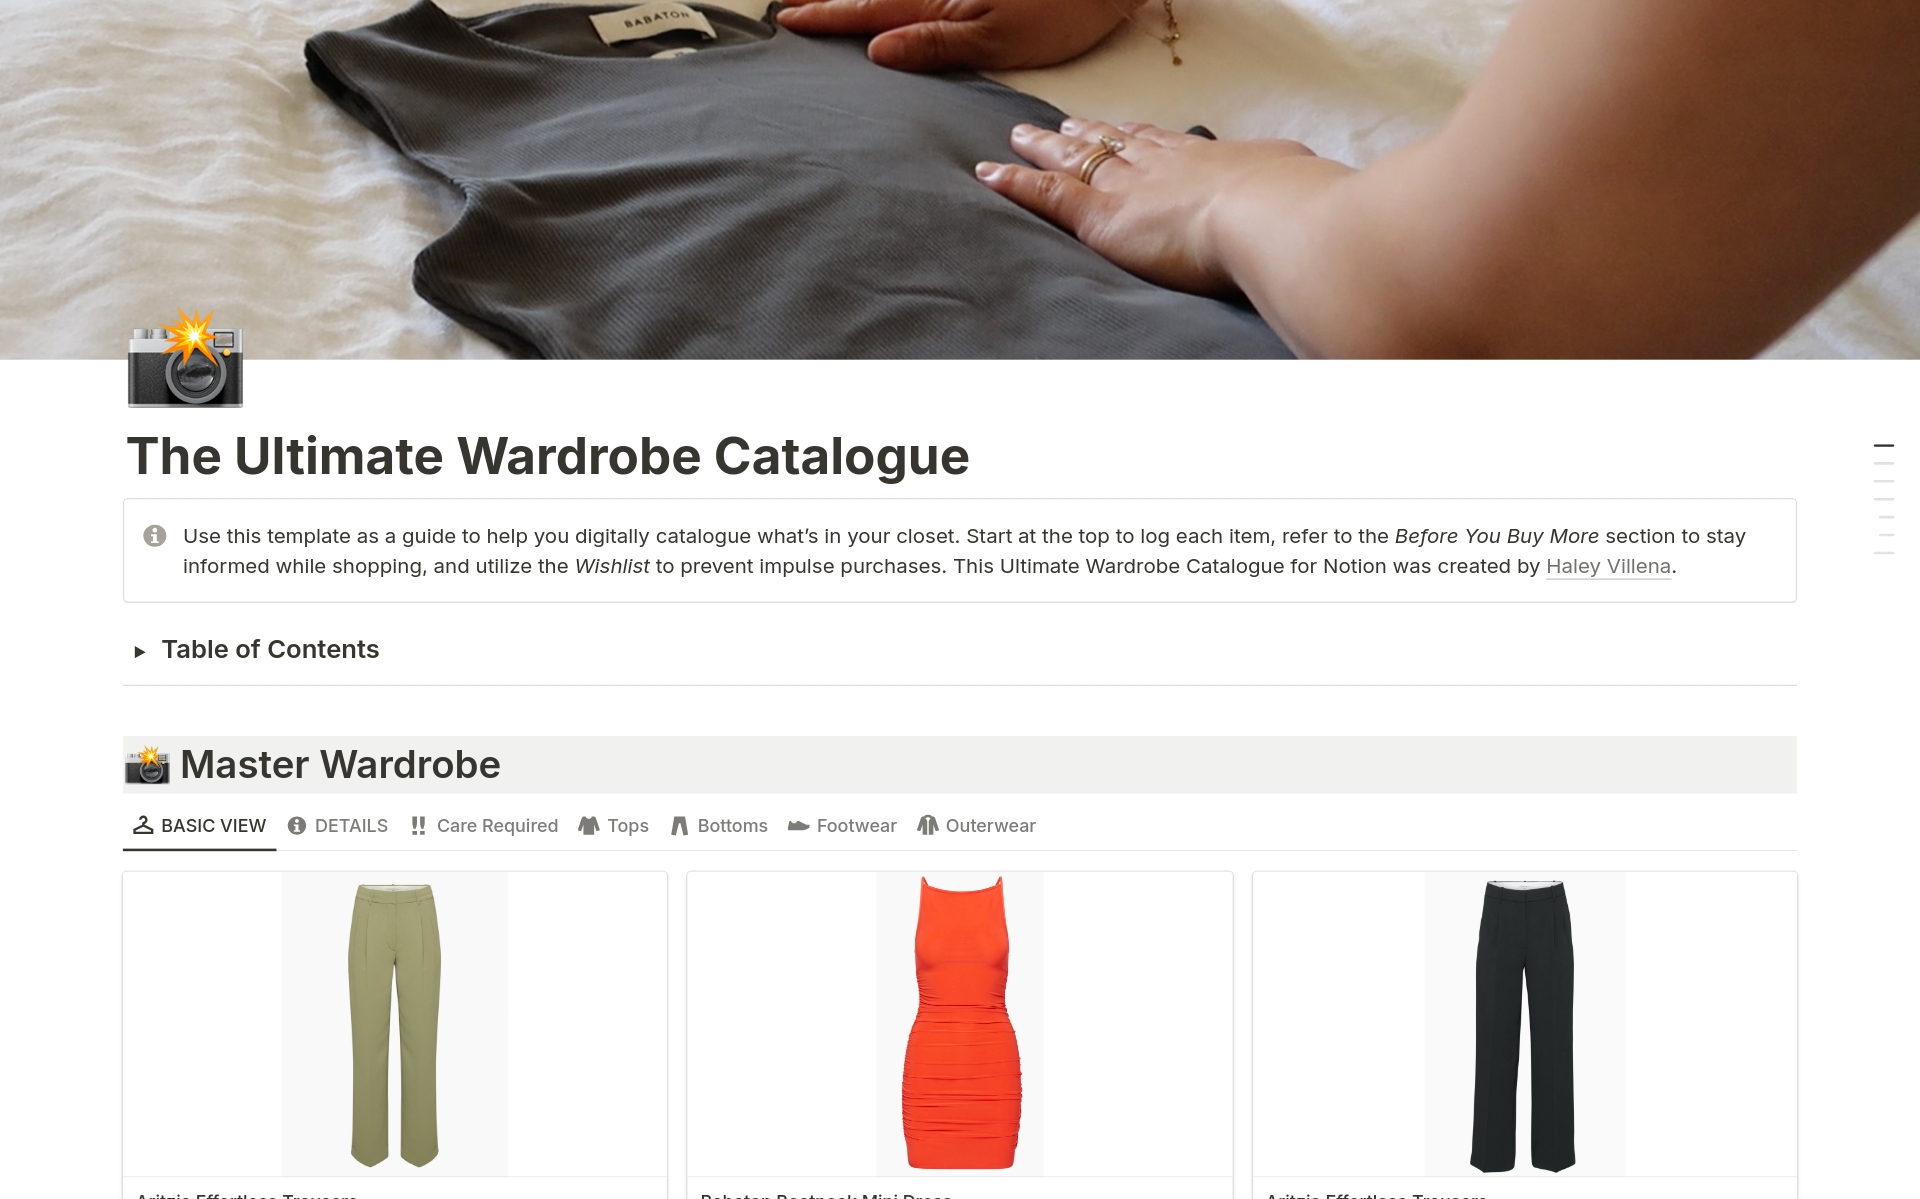 This meticulously designed tool empowers you to effortlessly catalog your wardrobe items, facilitating seamless outfit planning and informed shopping decisions. Perfect for those who crave a streamlined approach to wardrobe organization and optimization.